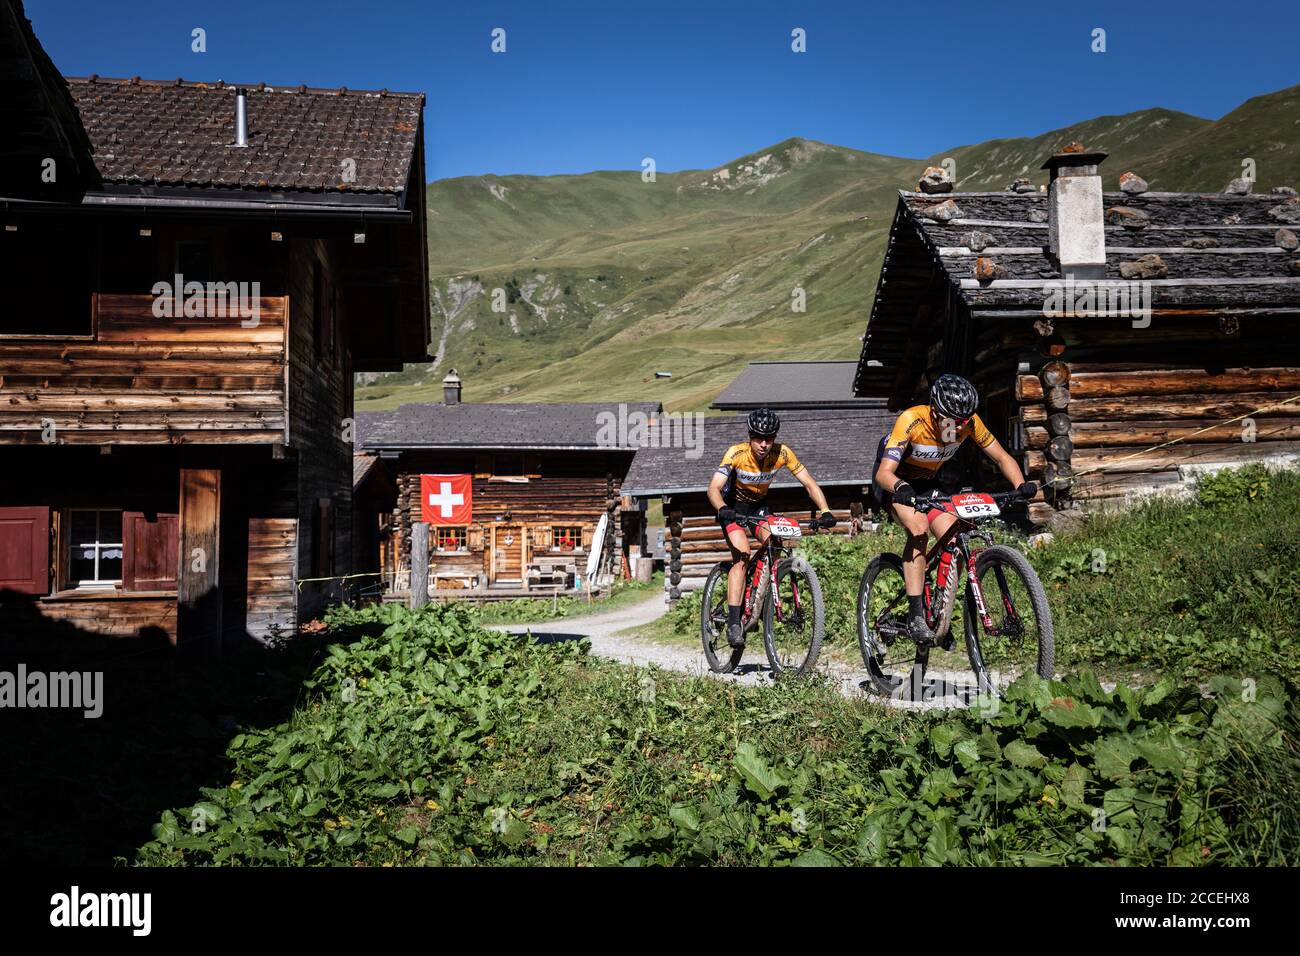 Annika Langvad and  Haley Batten (Denmark, USA) of two-person teams in action during the 4th day of Swiss Epic 5-day stage race in Davos, Switzerland, Stock Photo